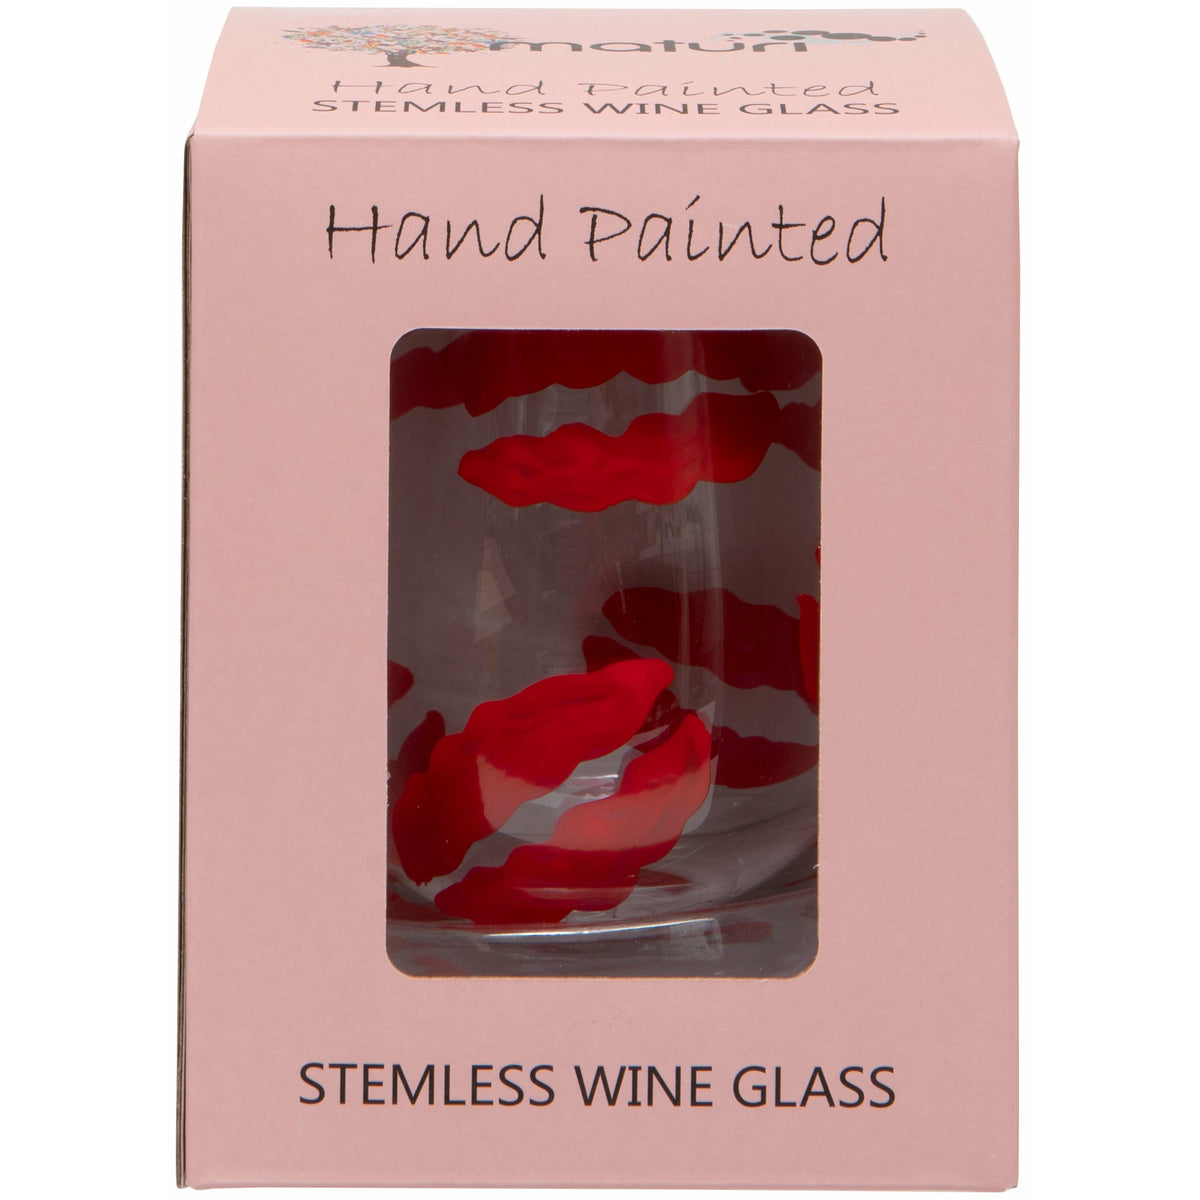 Hand Painted Kiss Stemless Wine Glass in Box